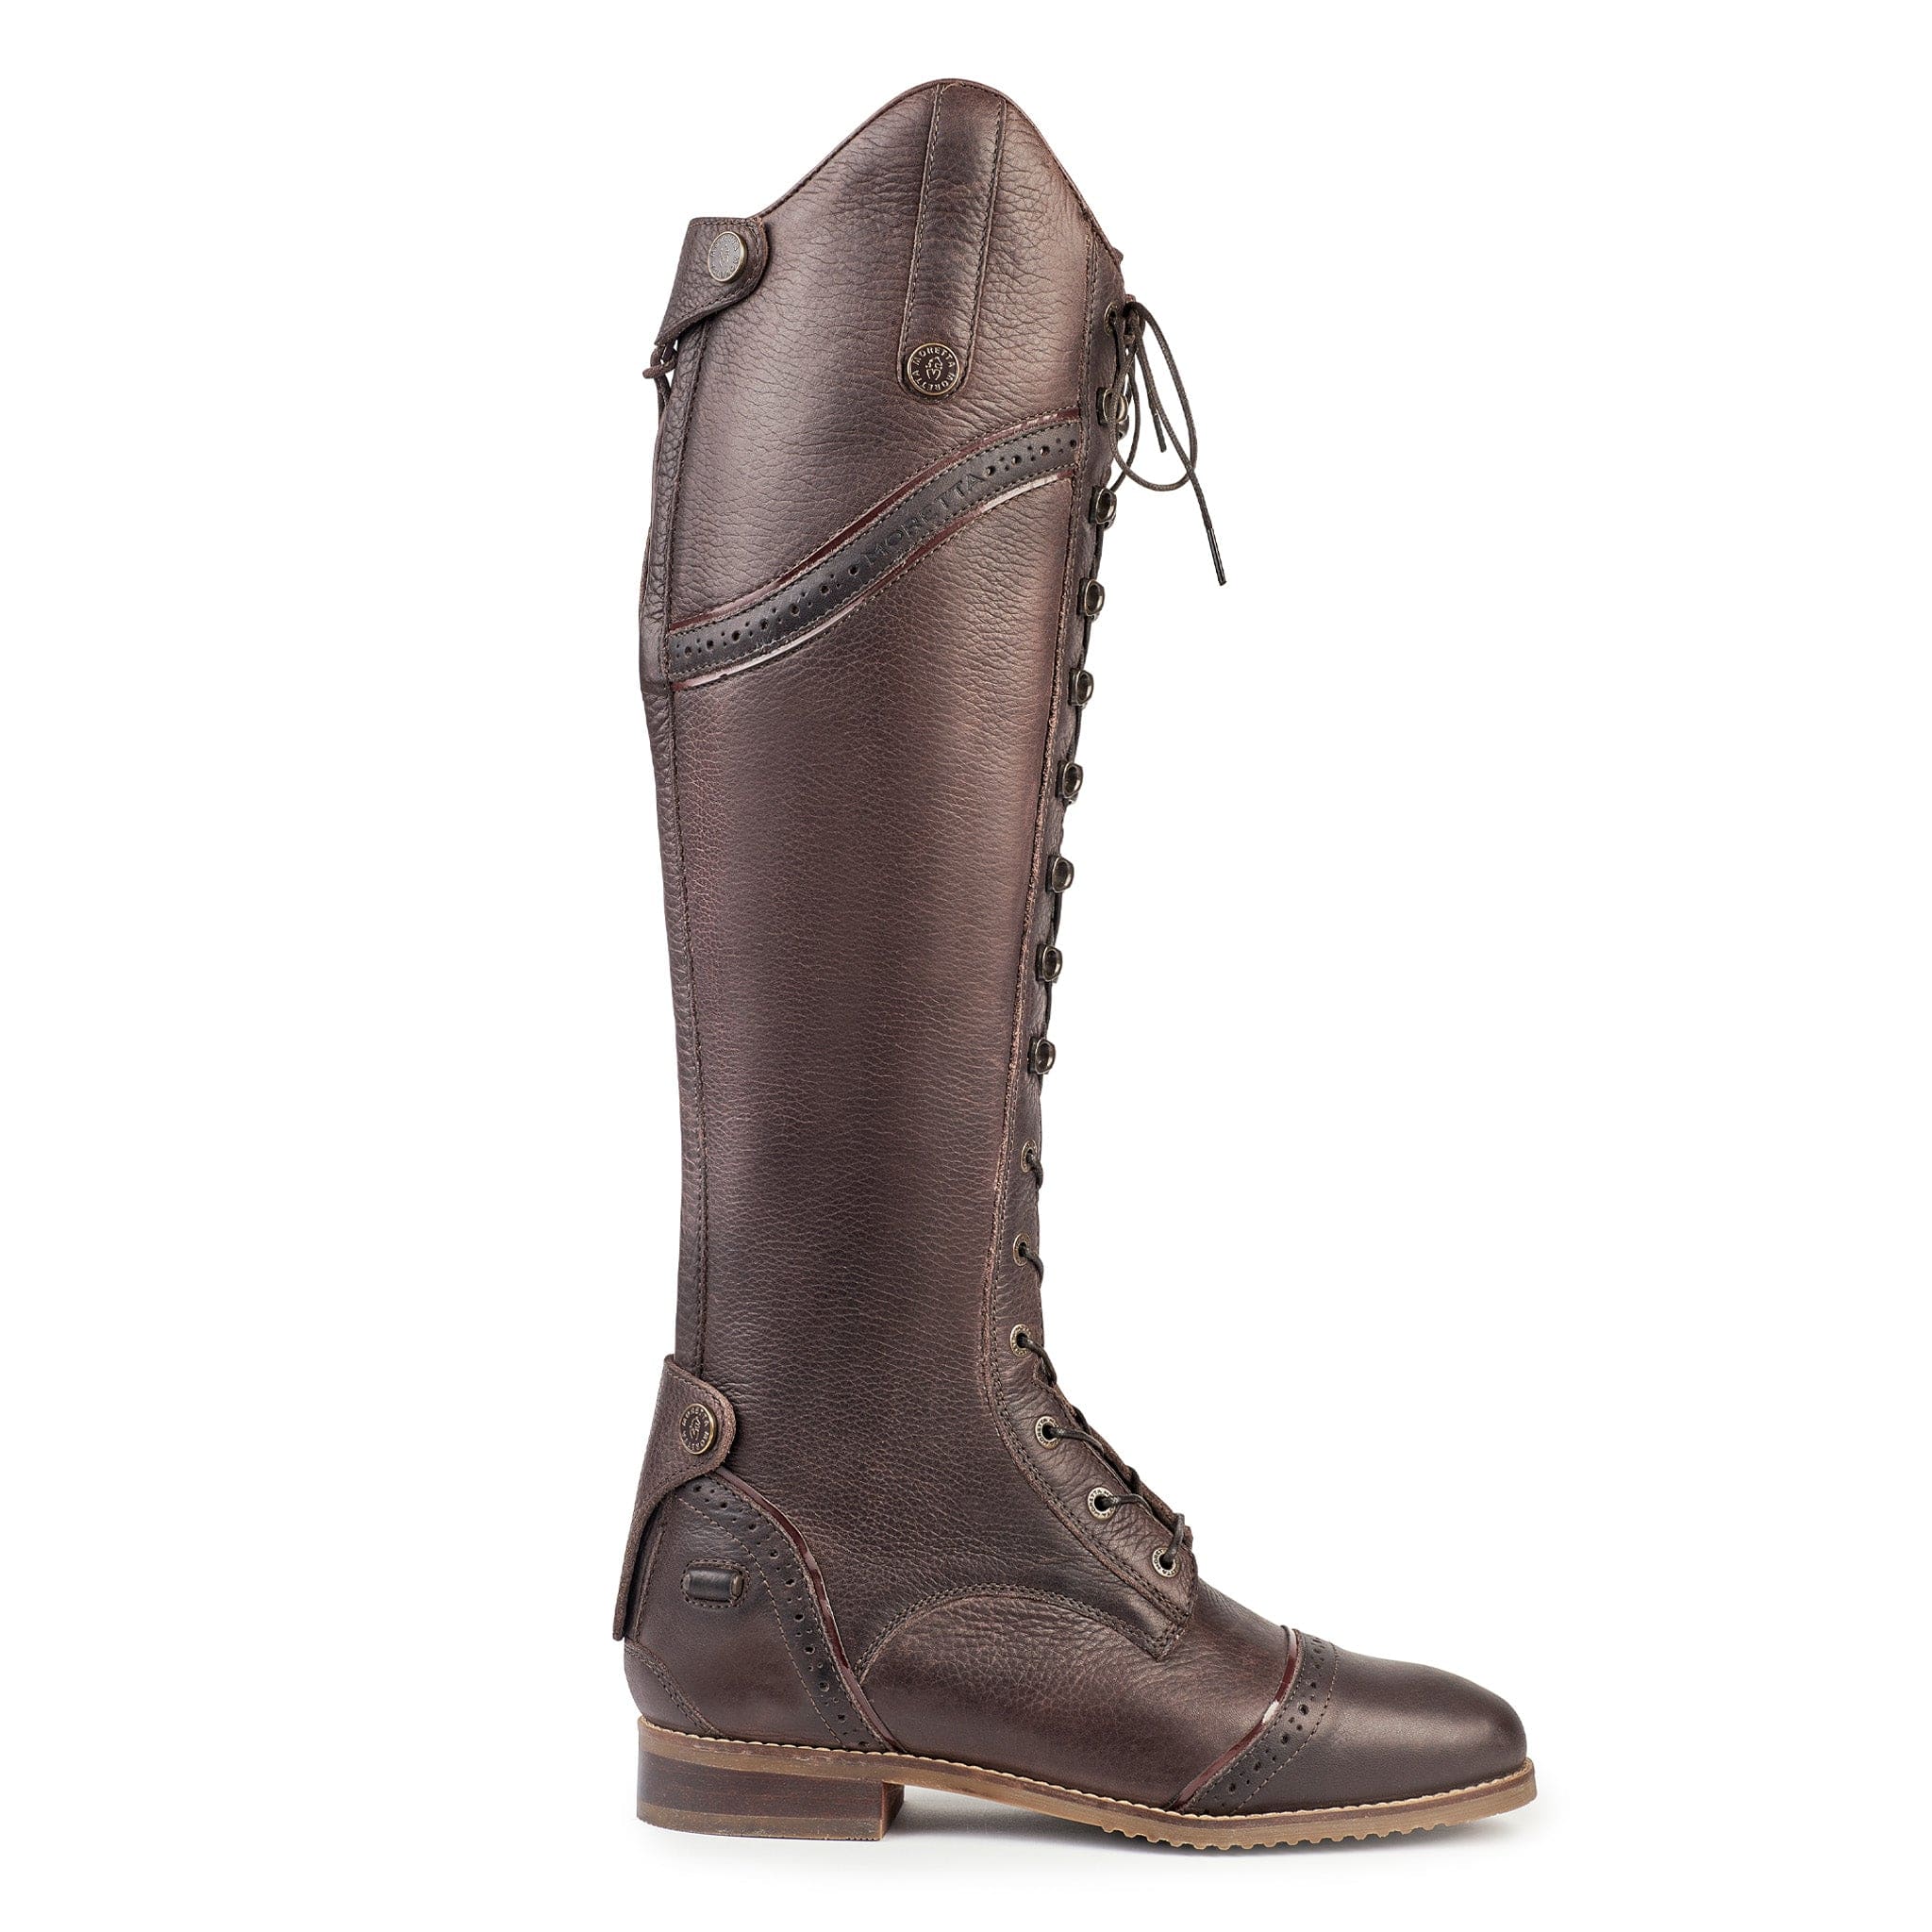 Moretta Maddalena Riding Boots Brown 9728 Outer Side View